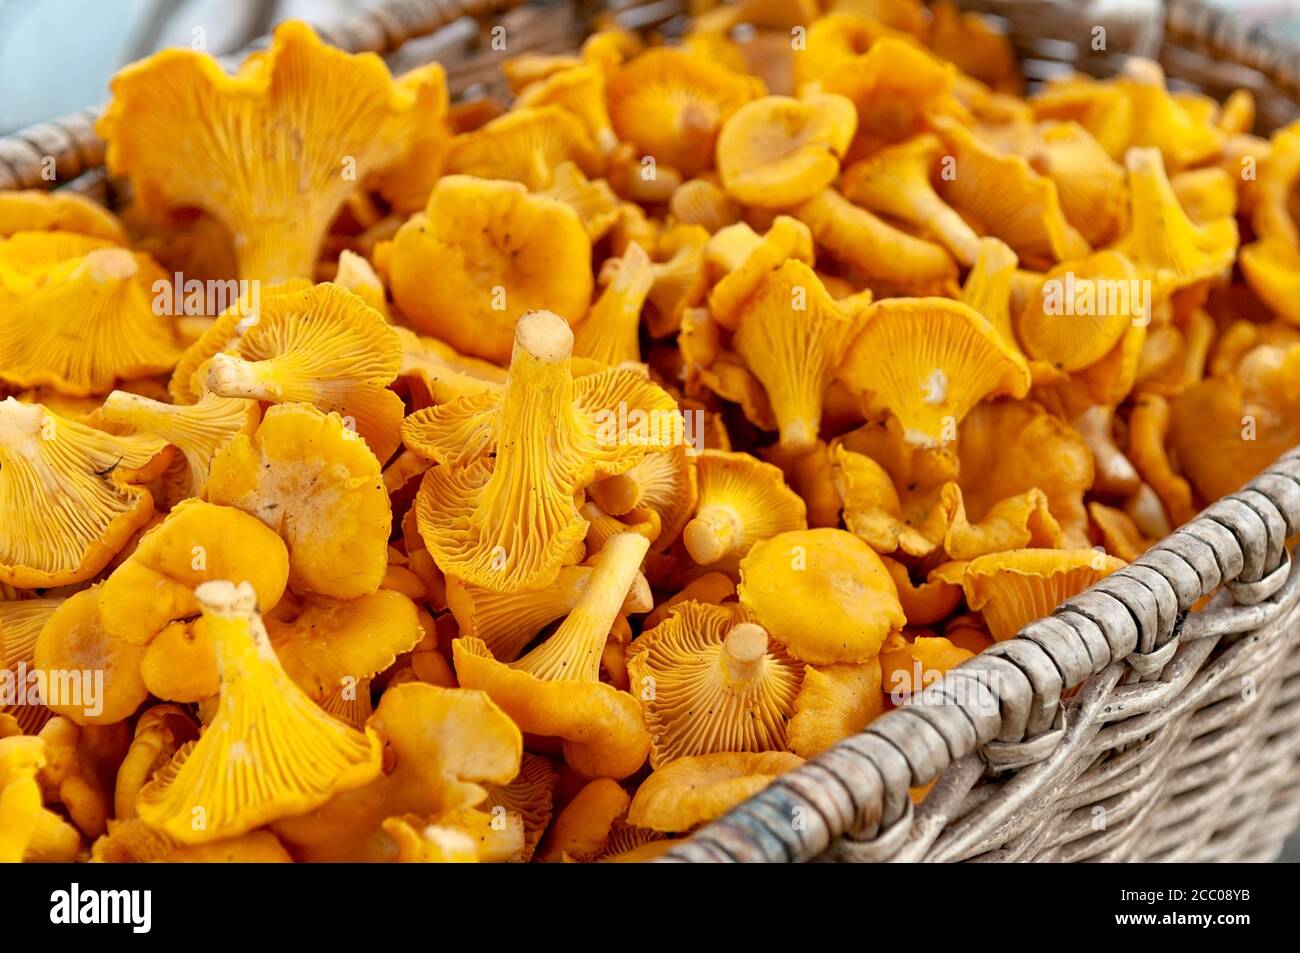 Chanterelle mushrooms in a wicker basket. Cantharellaceae Basidiomycetes. Stock Photo